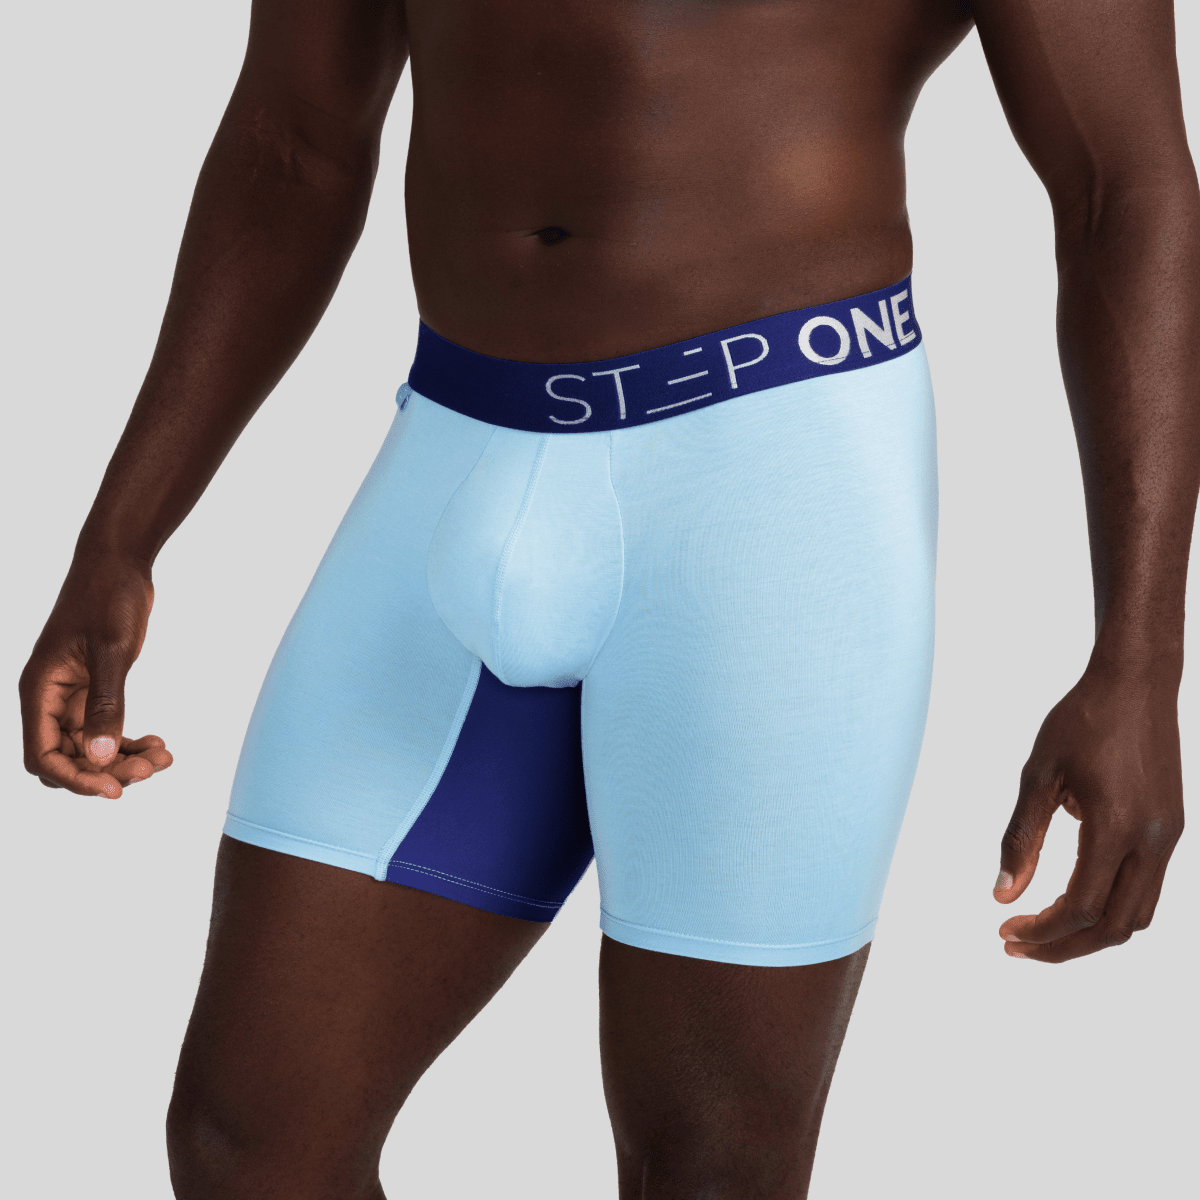 Boxer Brief - Megalodong - Bamboo Underwear